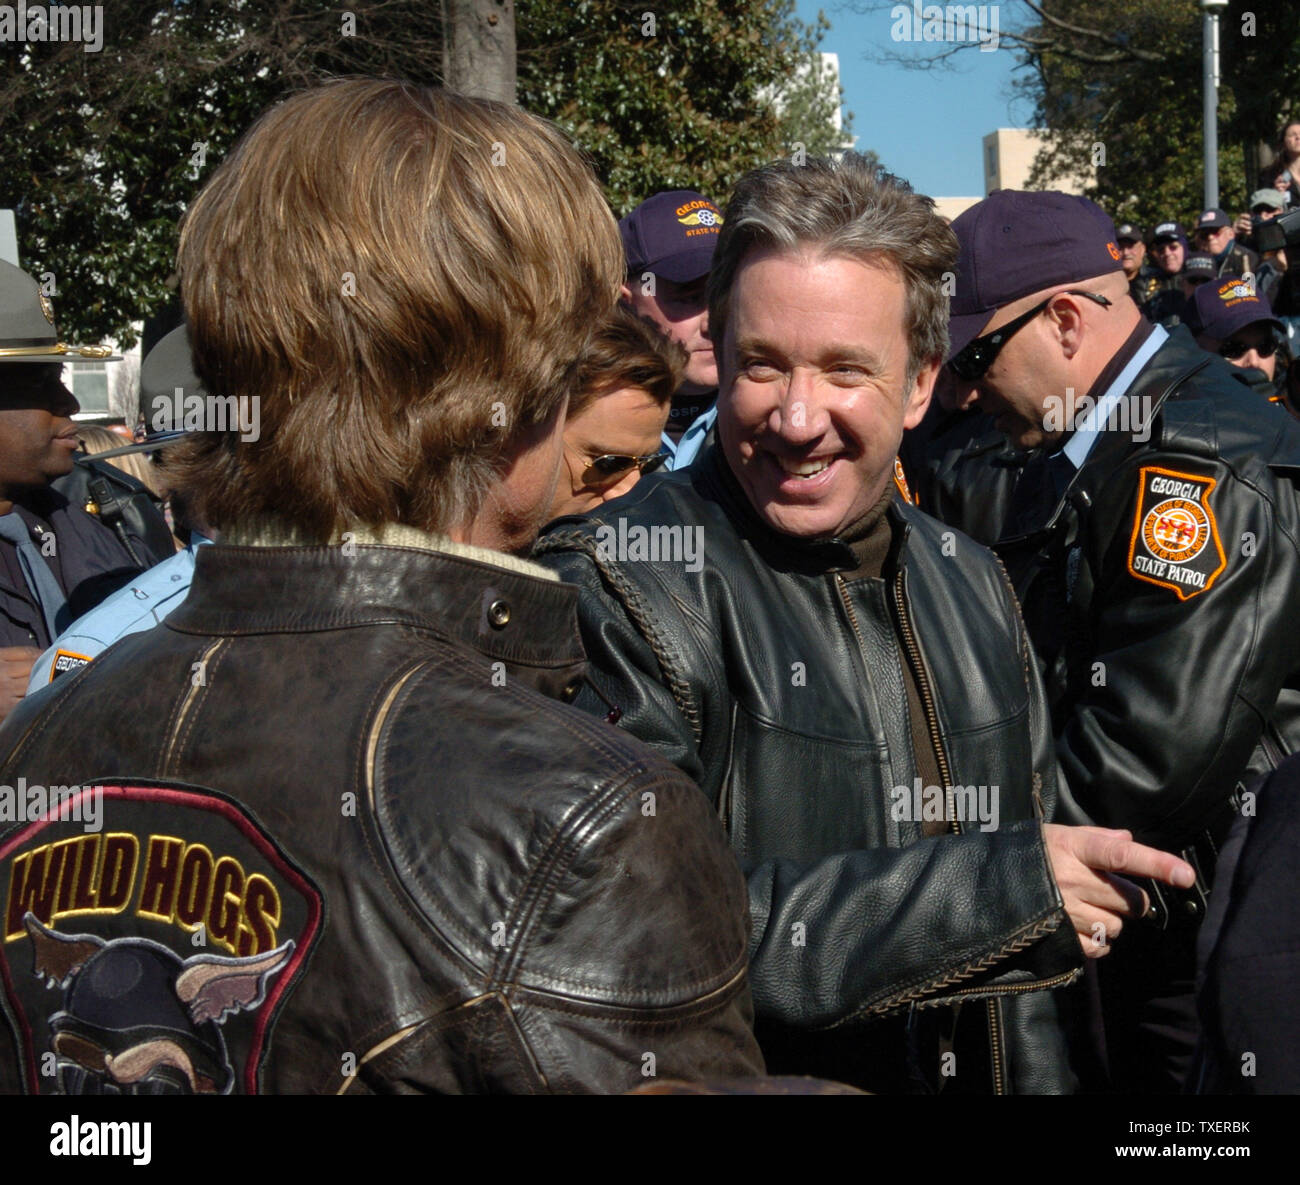 'Wild Hogs' stars Willam H. Macy (L) and Tim Allen appear at a motorcycle safety rally at the Georgia State Capitol on February 6, 2007. The actors promoted a motorcycle safety program and their upcoming comedy film. (UPI Photo/John Dickerson) Stock Photo